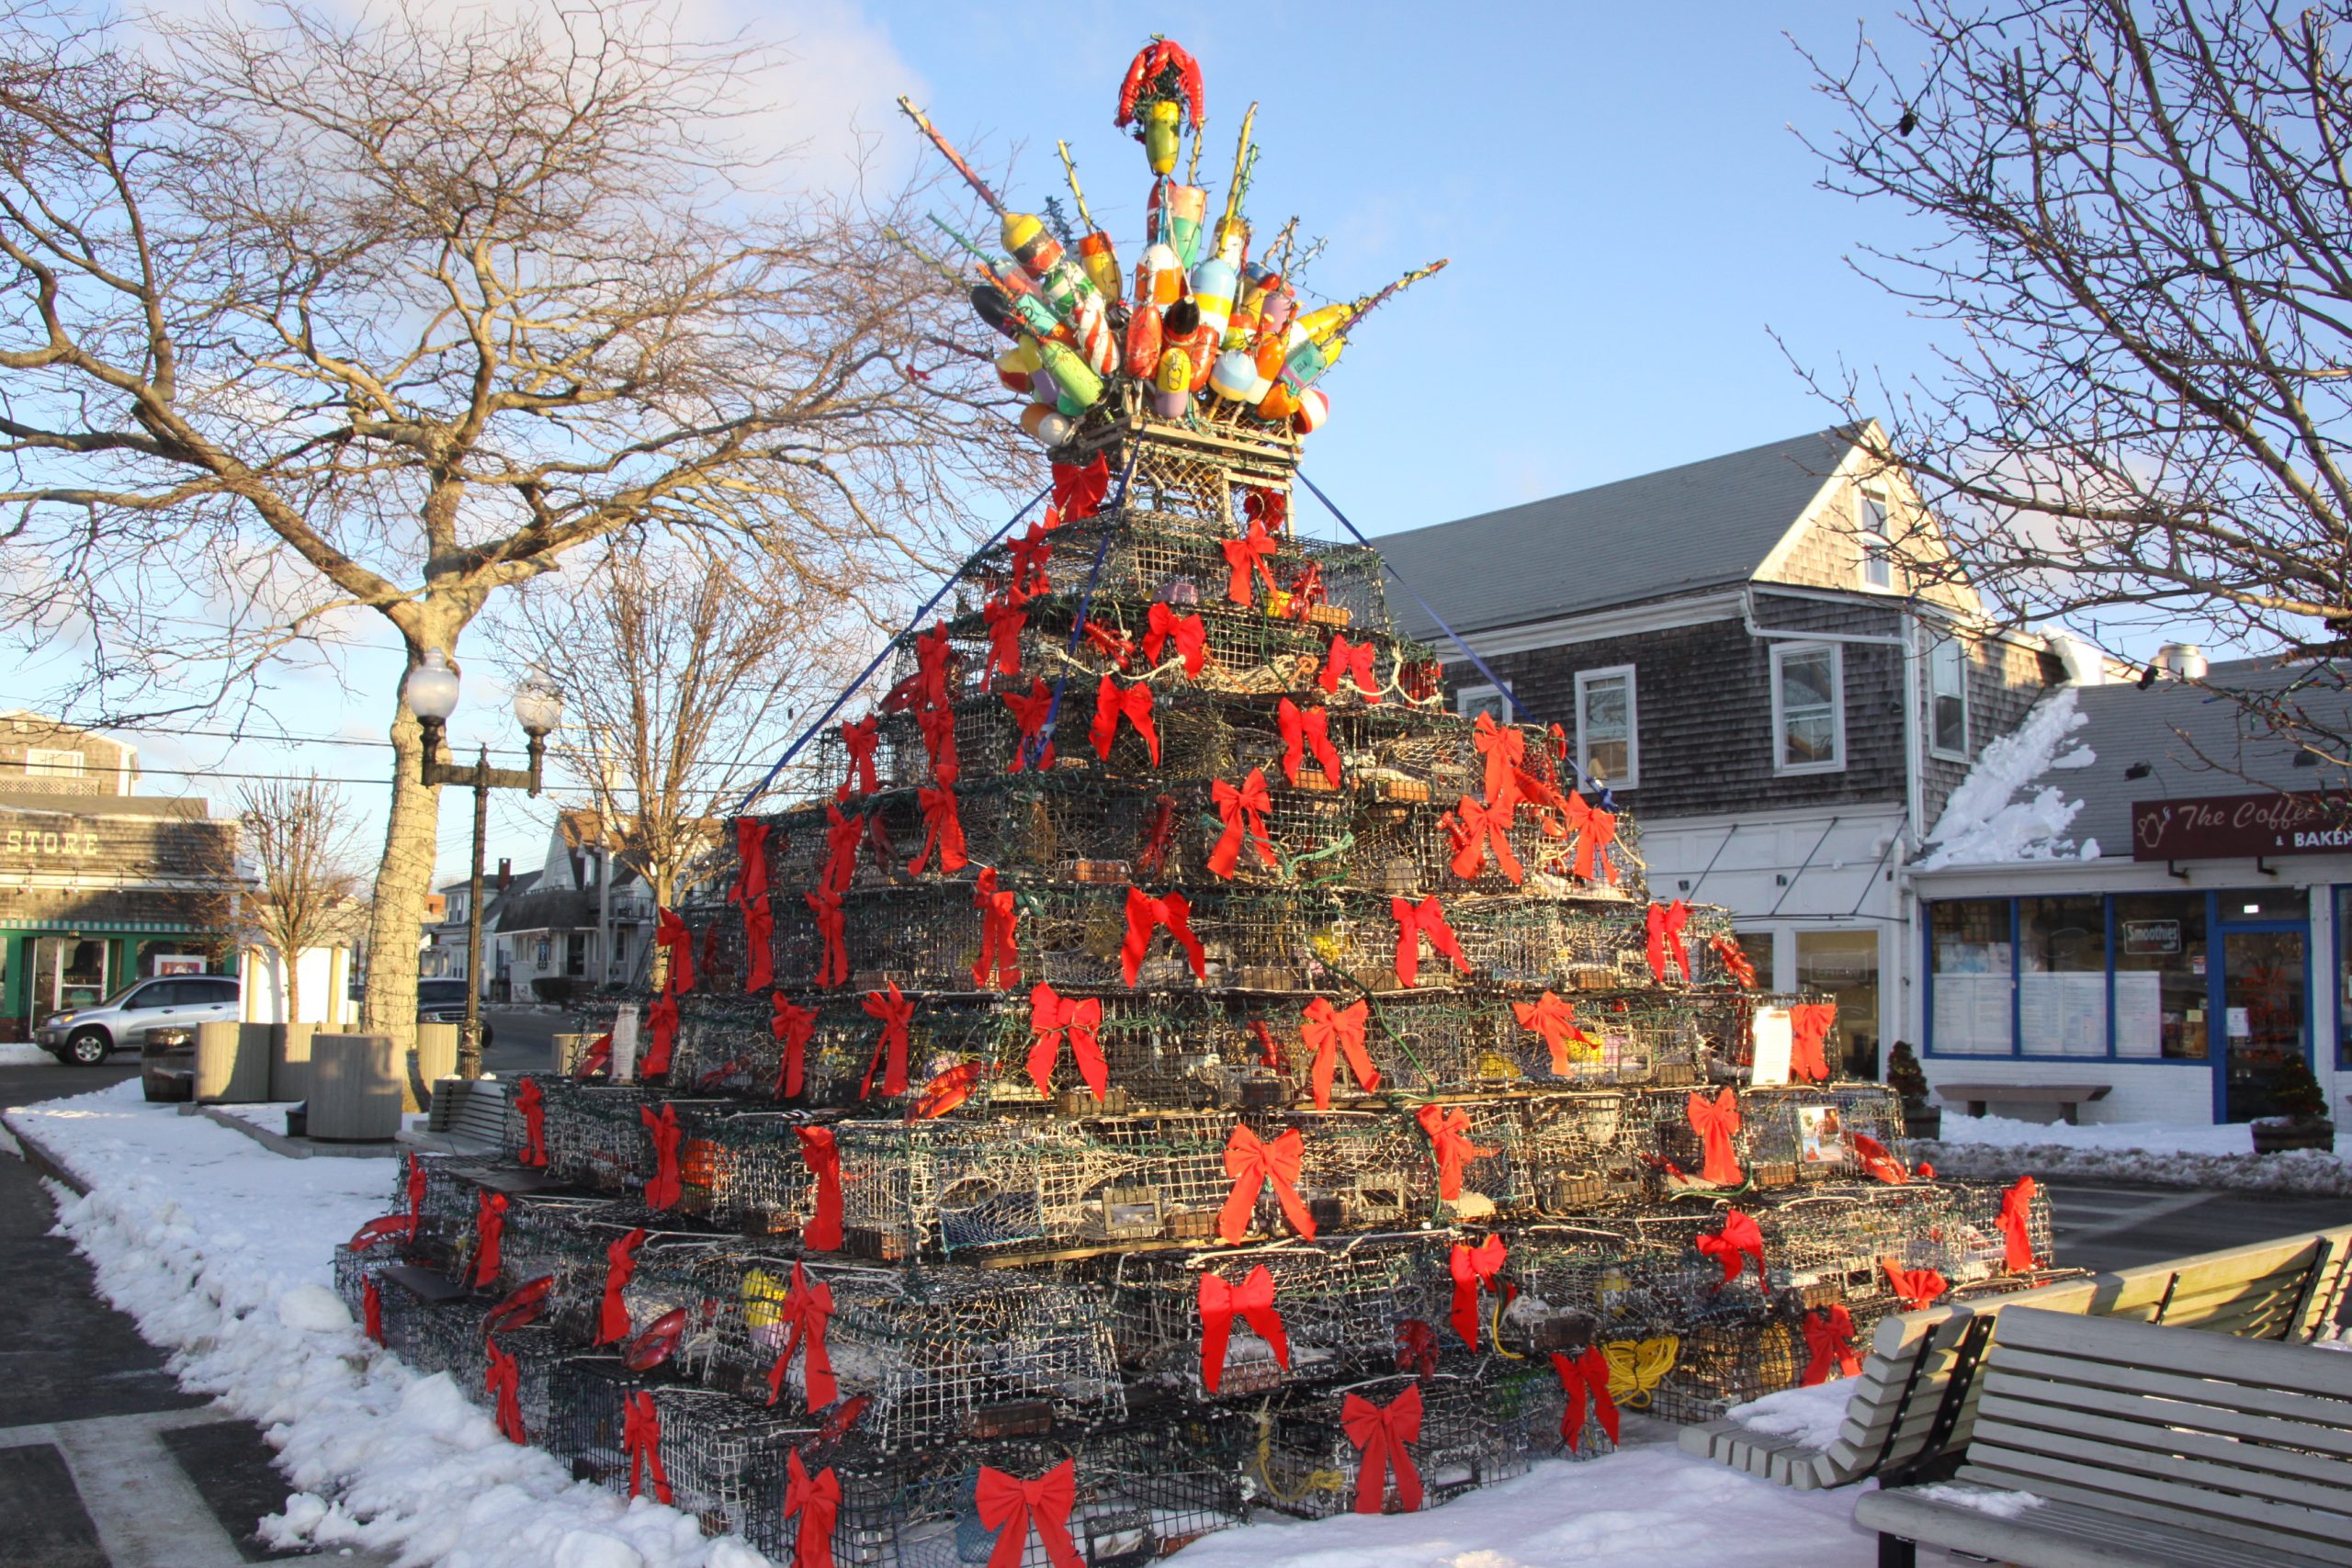 Lobster Pot Christnas Tree (user submitted)